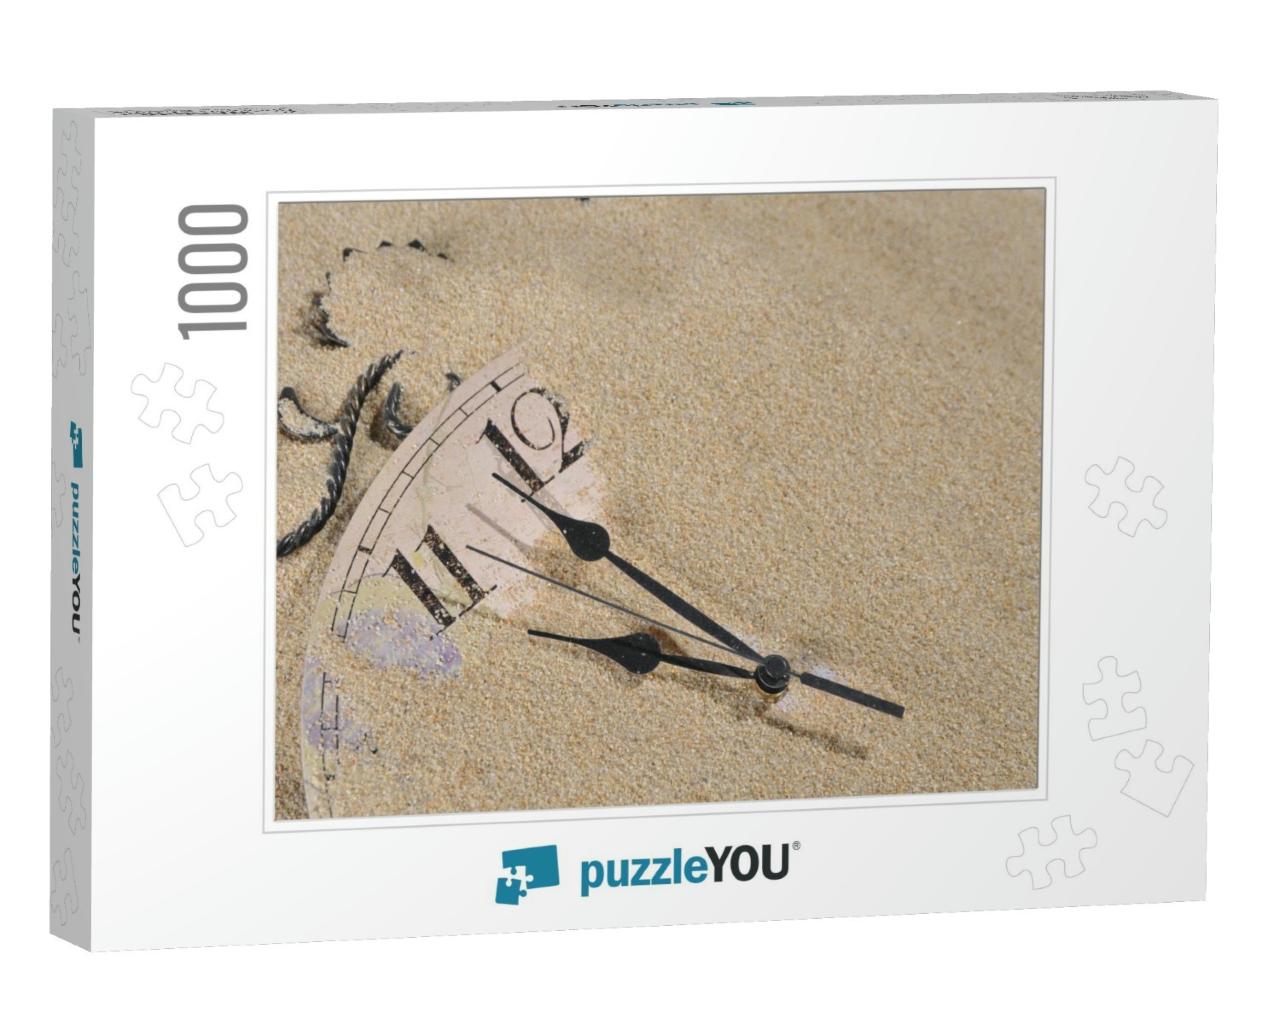 Analog Wall Clock Buried Under the Sand... Jigsaw Puzzle with 1000 pieces